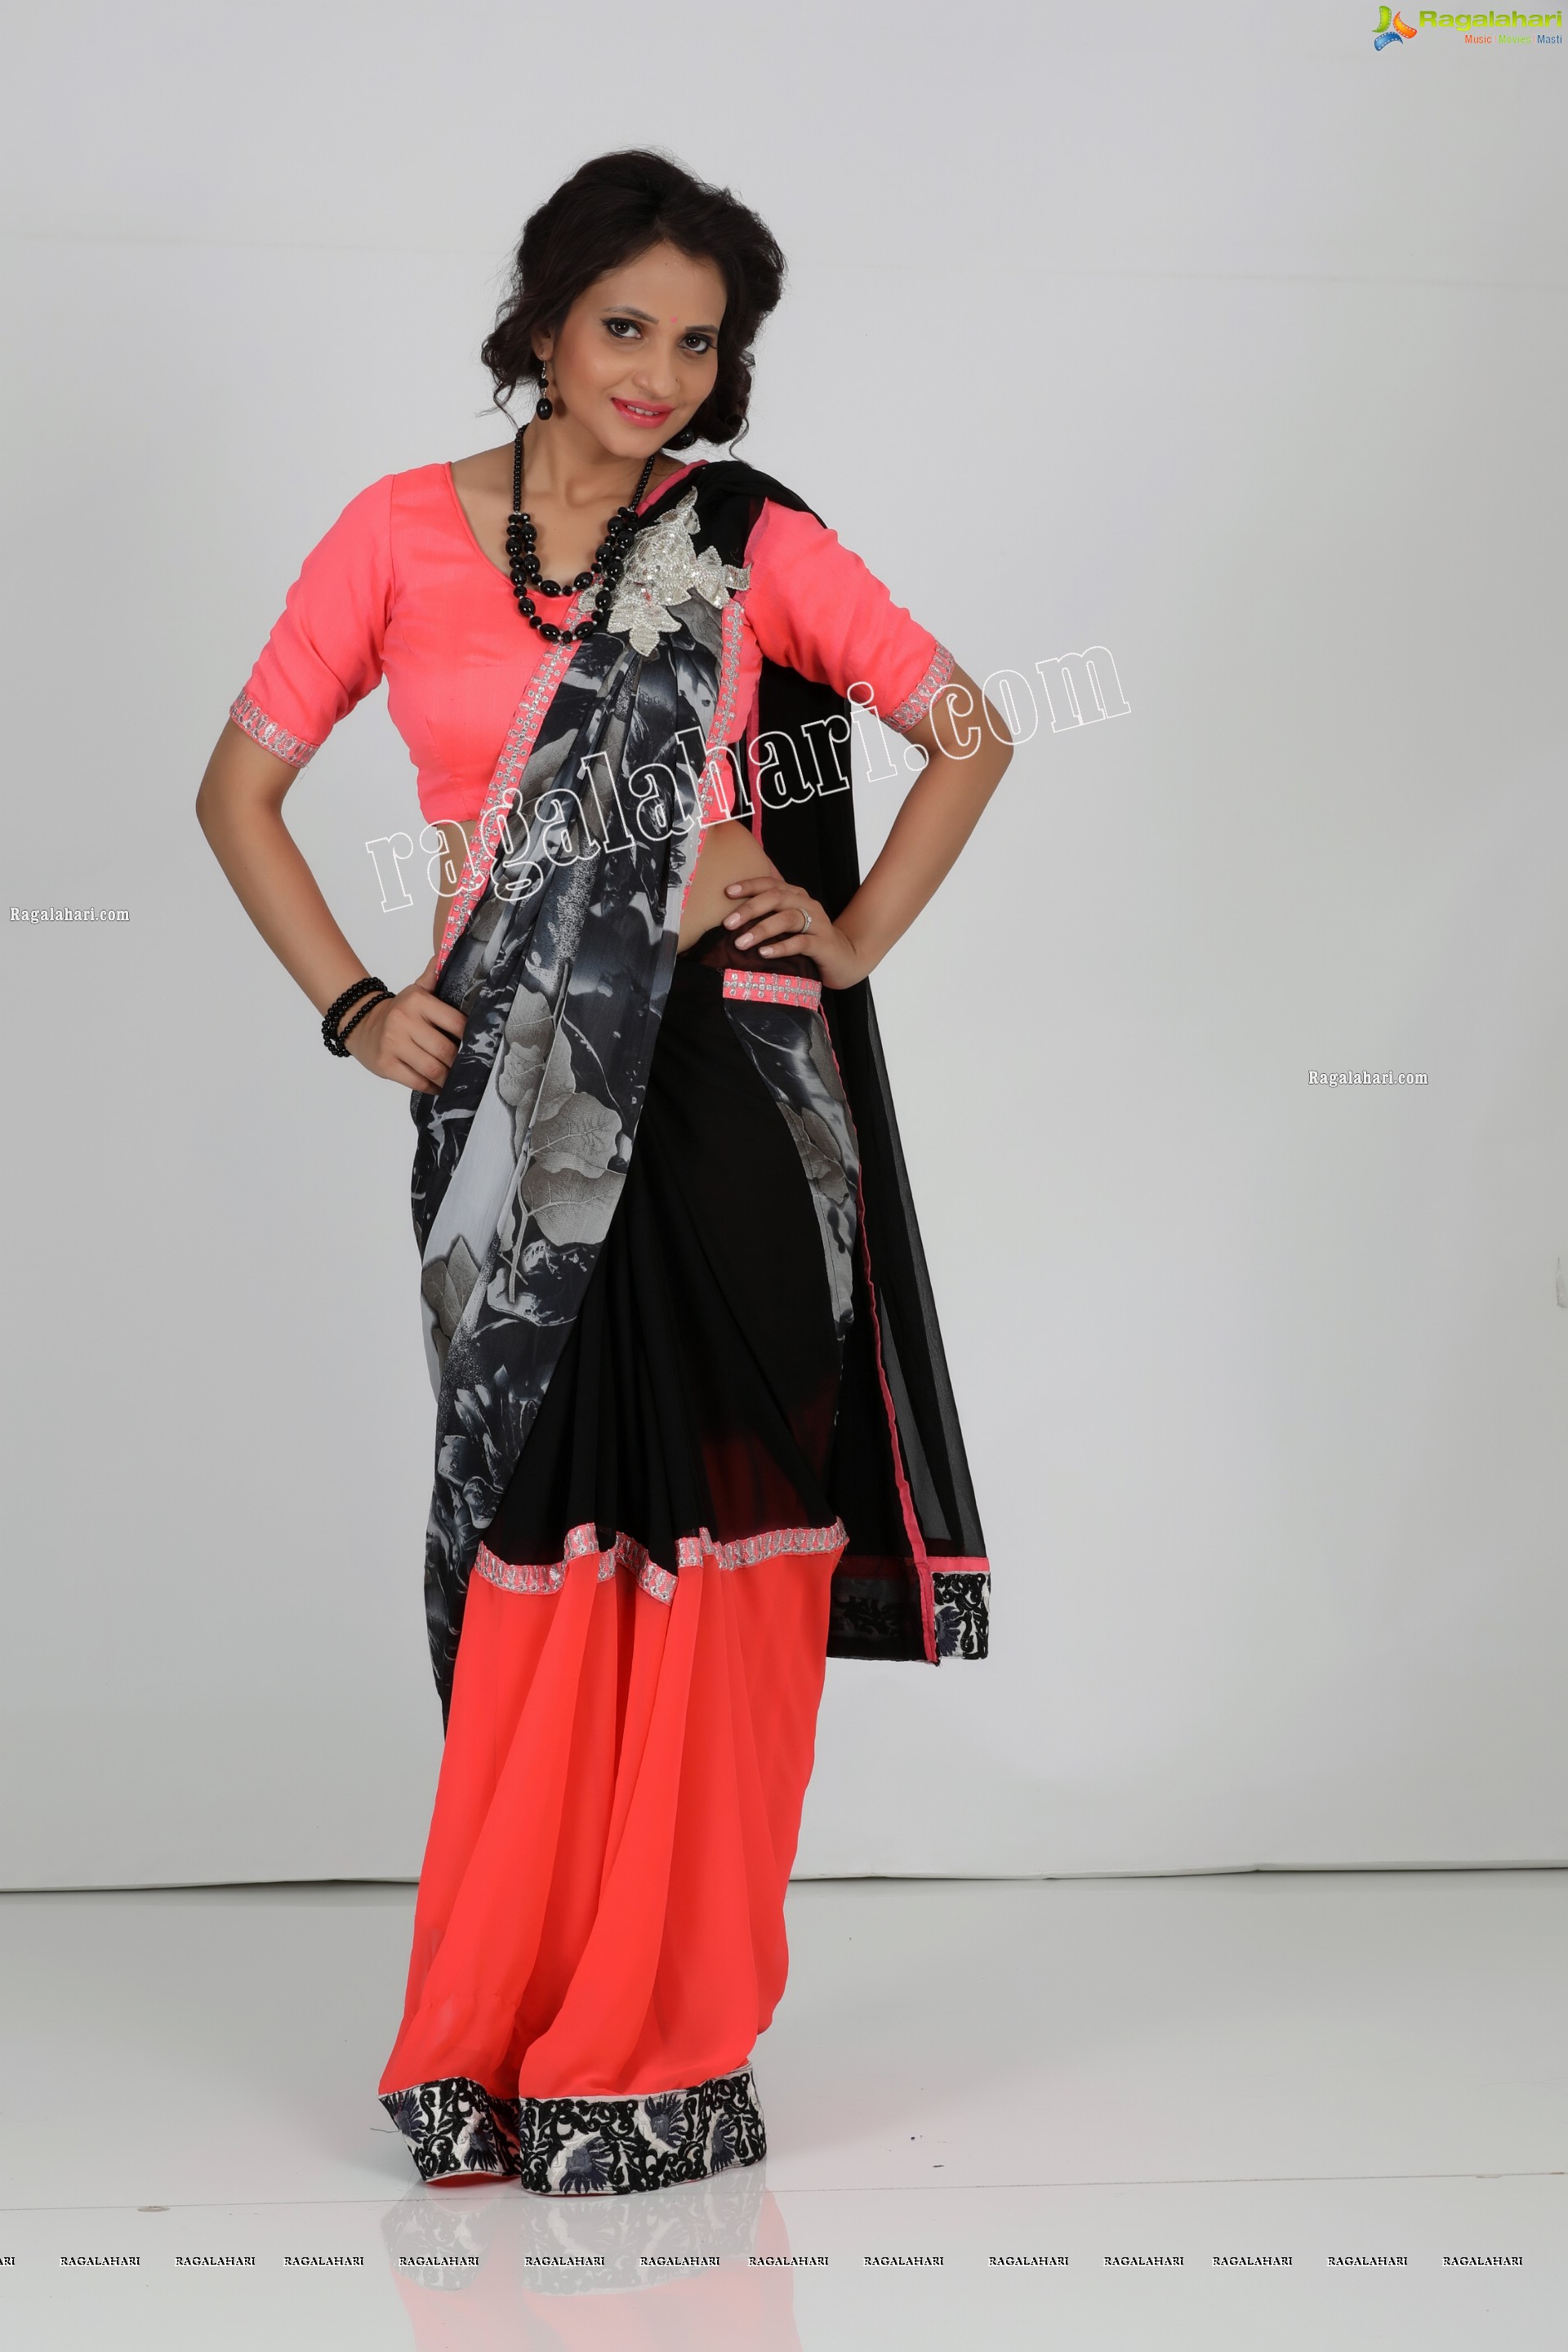 Khushboo Naaz in Black and Peach Printed Chiffon Saree Exclusive Photo Shoot